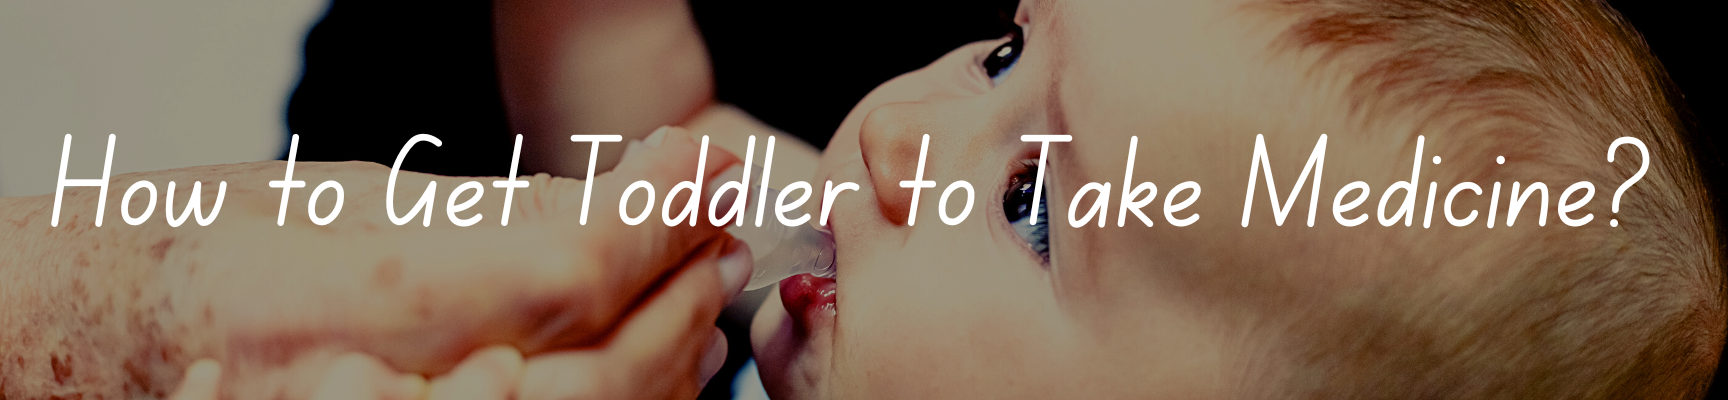 How to Get Toddler to Take Medicine